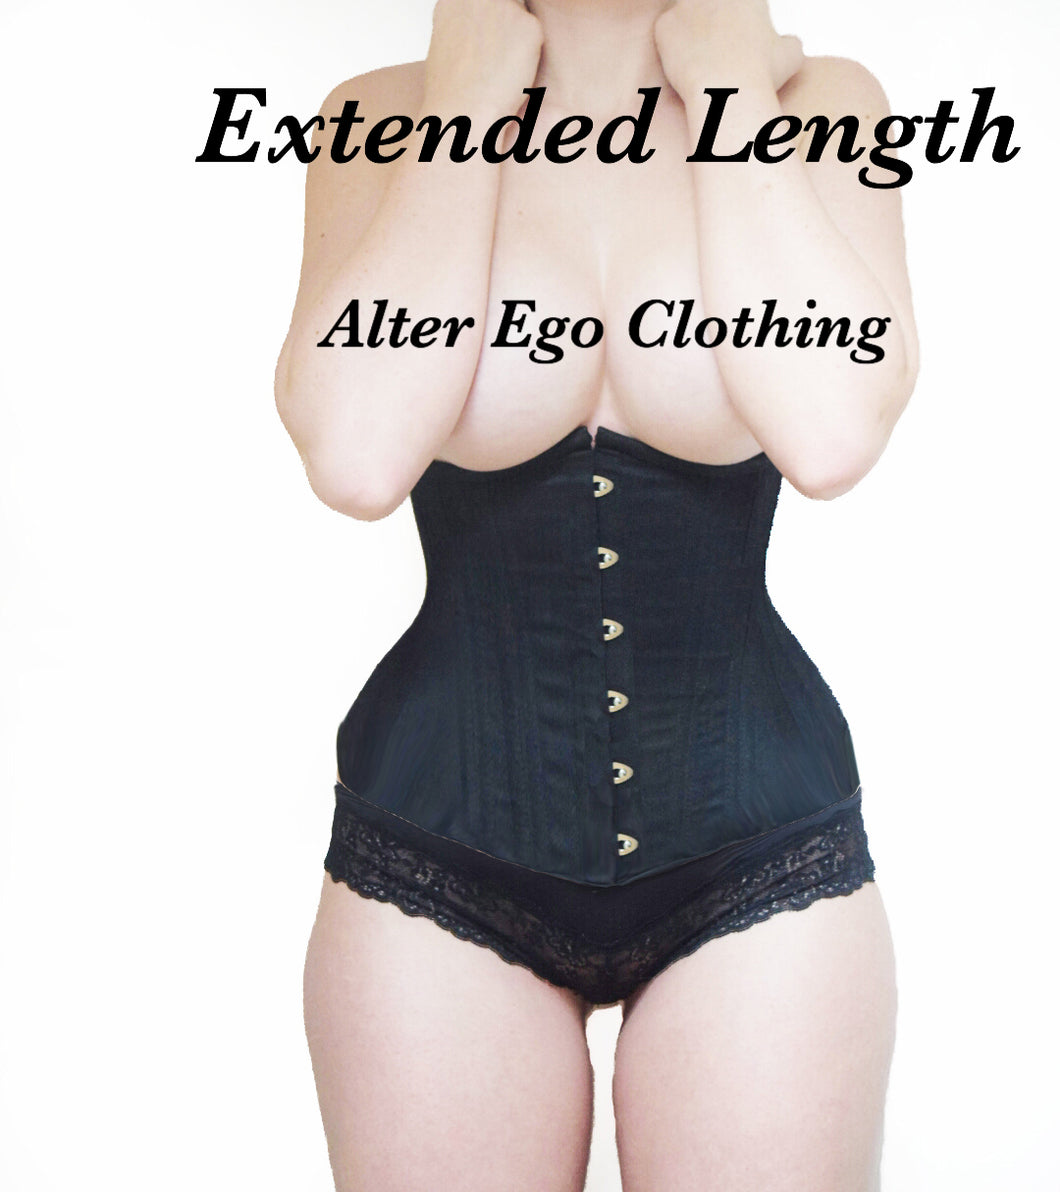 ALTER EGO CLOTHING - Know the difference! LATEX CINCHER VS AEC WAIST TRAINER  #IfItAintSteelItAintReal #LetUsUpgradeYou #AECChangingLivesOneInchAtATime  Follow WAIST TRAINING 101 www.facebook.com/groups/waisttraining101